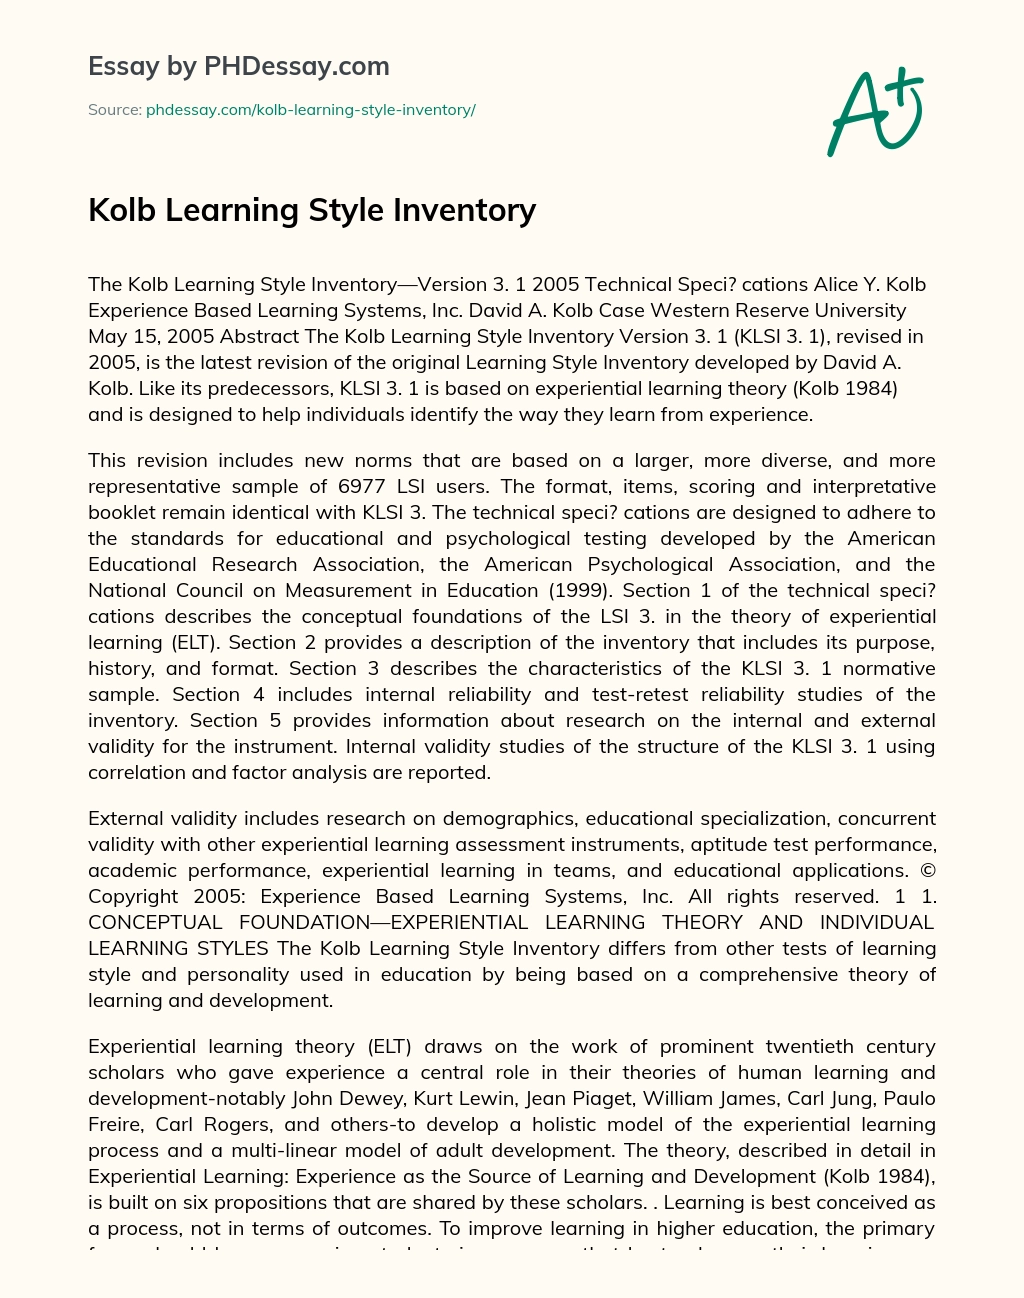 Kolb Learning Style Inventory essay